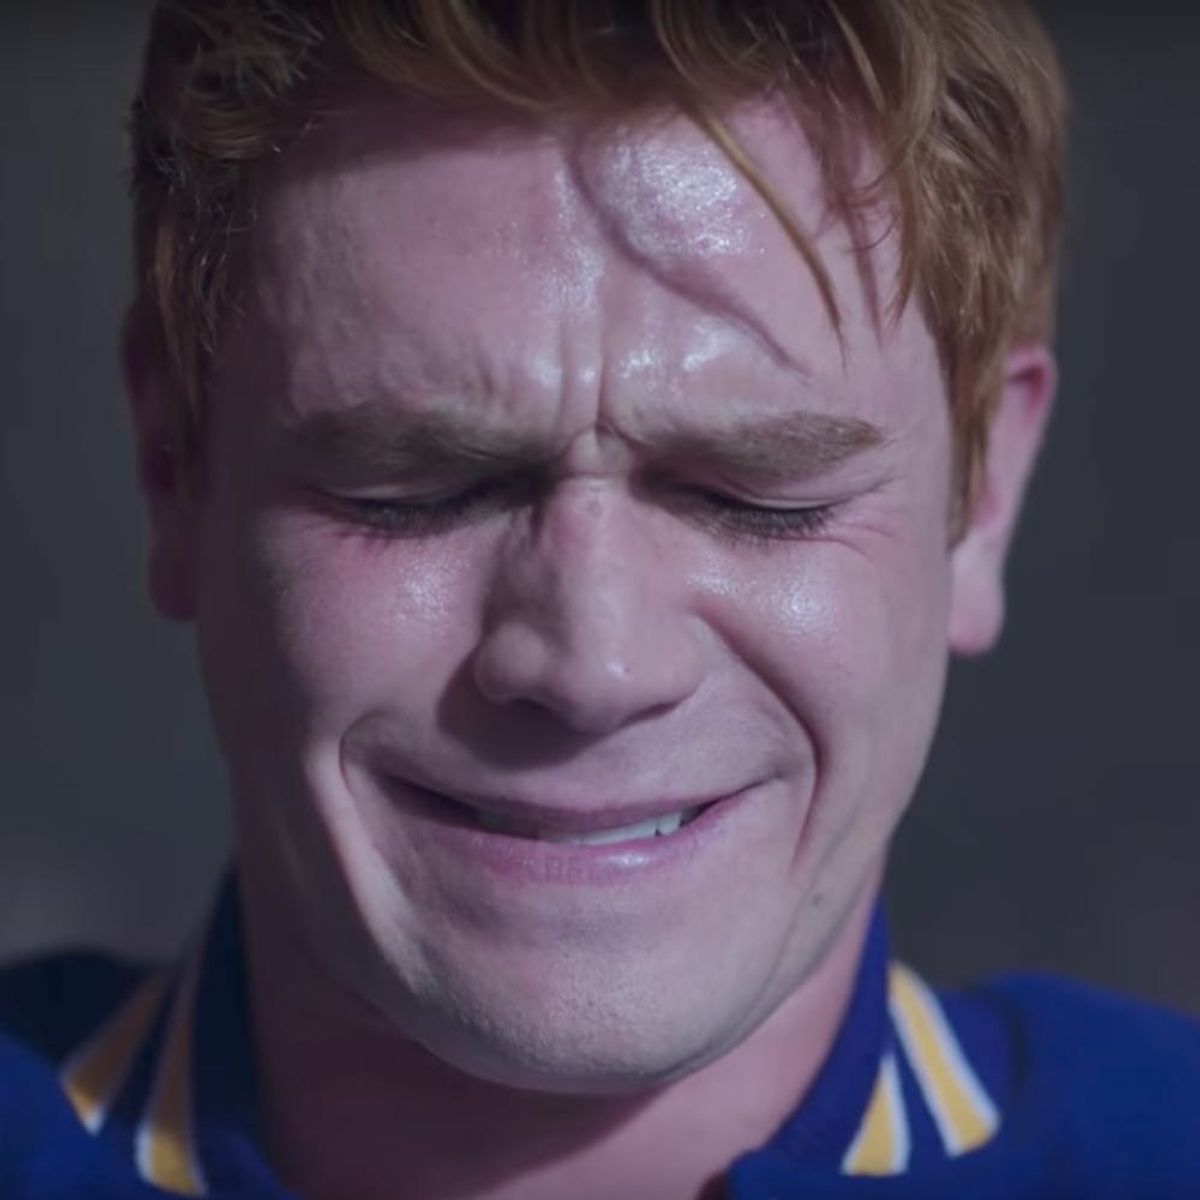 Things Are Heating Up for Archie and the Gang in This “Riverdale” Season 2 Trailer